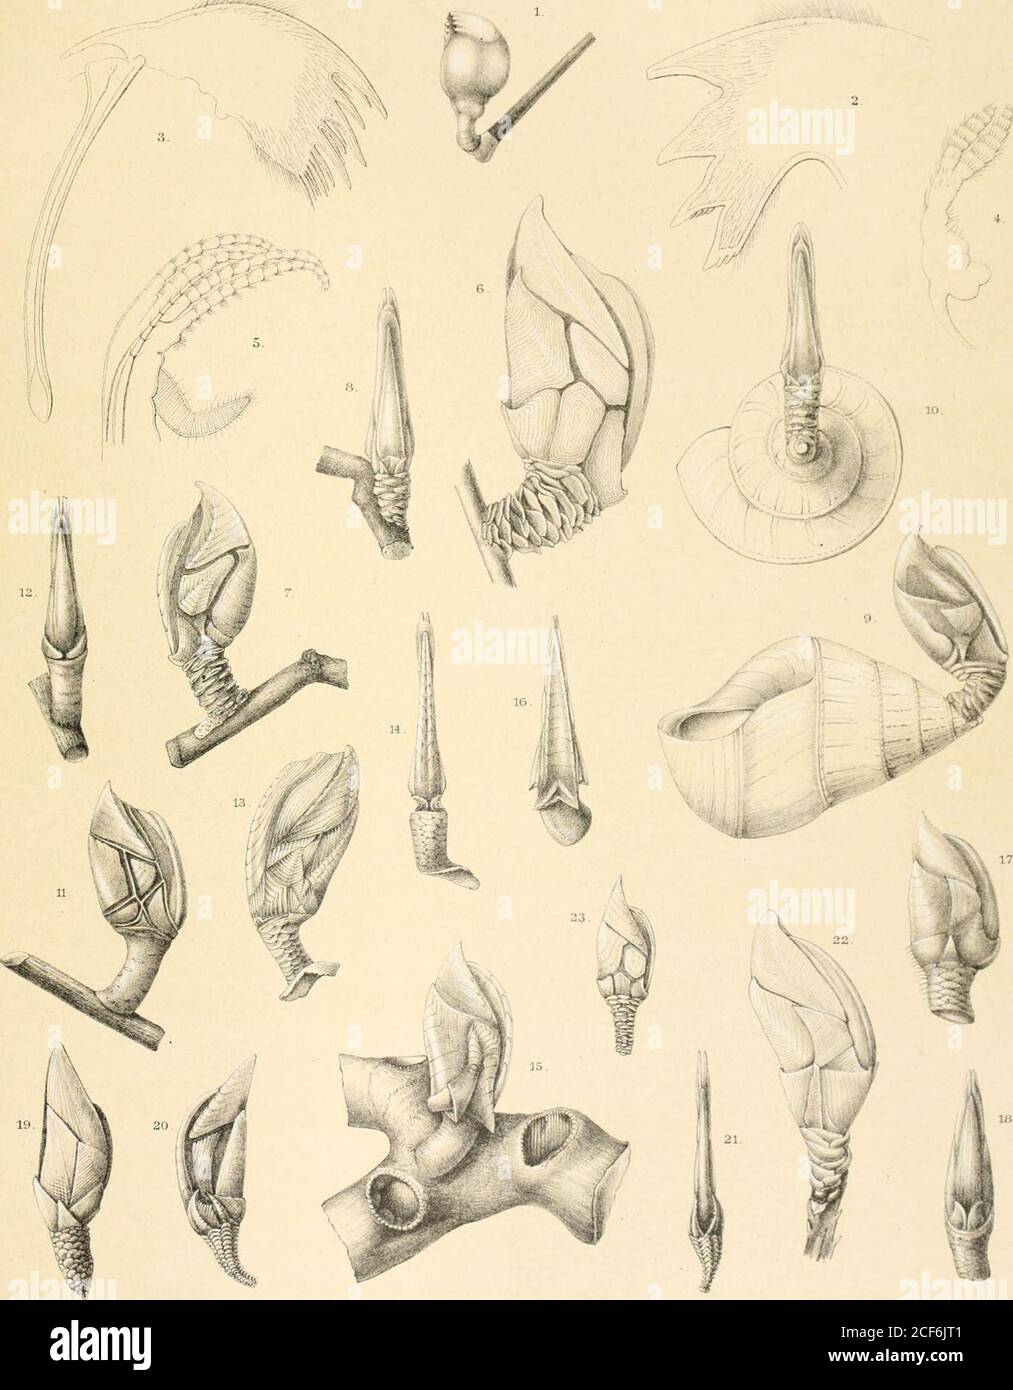 . Report on the scientific results of the voyage of H.M.S. Challenger during the years 1873-76 : under the command of Captain George S. Nares, R.N., F.R.S. and Captain Frank Turle Thomson, R.N.. the carinal side; magnified 2 diameters. Figs. 13, 14. Scalpellum compressum, n. sp. Fig. 13. Animal, lateral view ; natural size. Fig. 11. Animal, seen from the carinal side; natural size. Figs. 15,16. Scalpellum parallelogramma, n. sp. Fig. 15. Animal, lateral view; magnified 2 diameters Fig. 16. Animal, seen from the carinal side; magnified 2 diameters. Figs. 17. 18. Scalpellum triangulare, n. sp. F Stock Photo